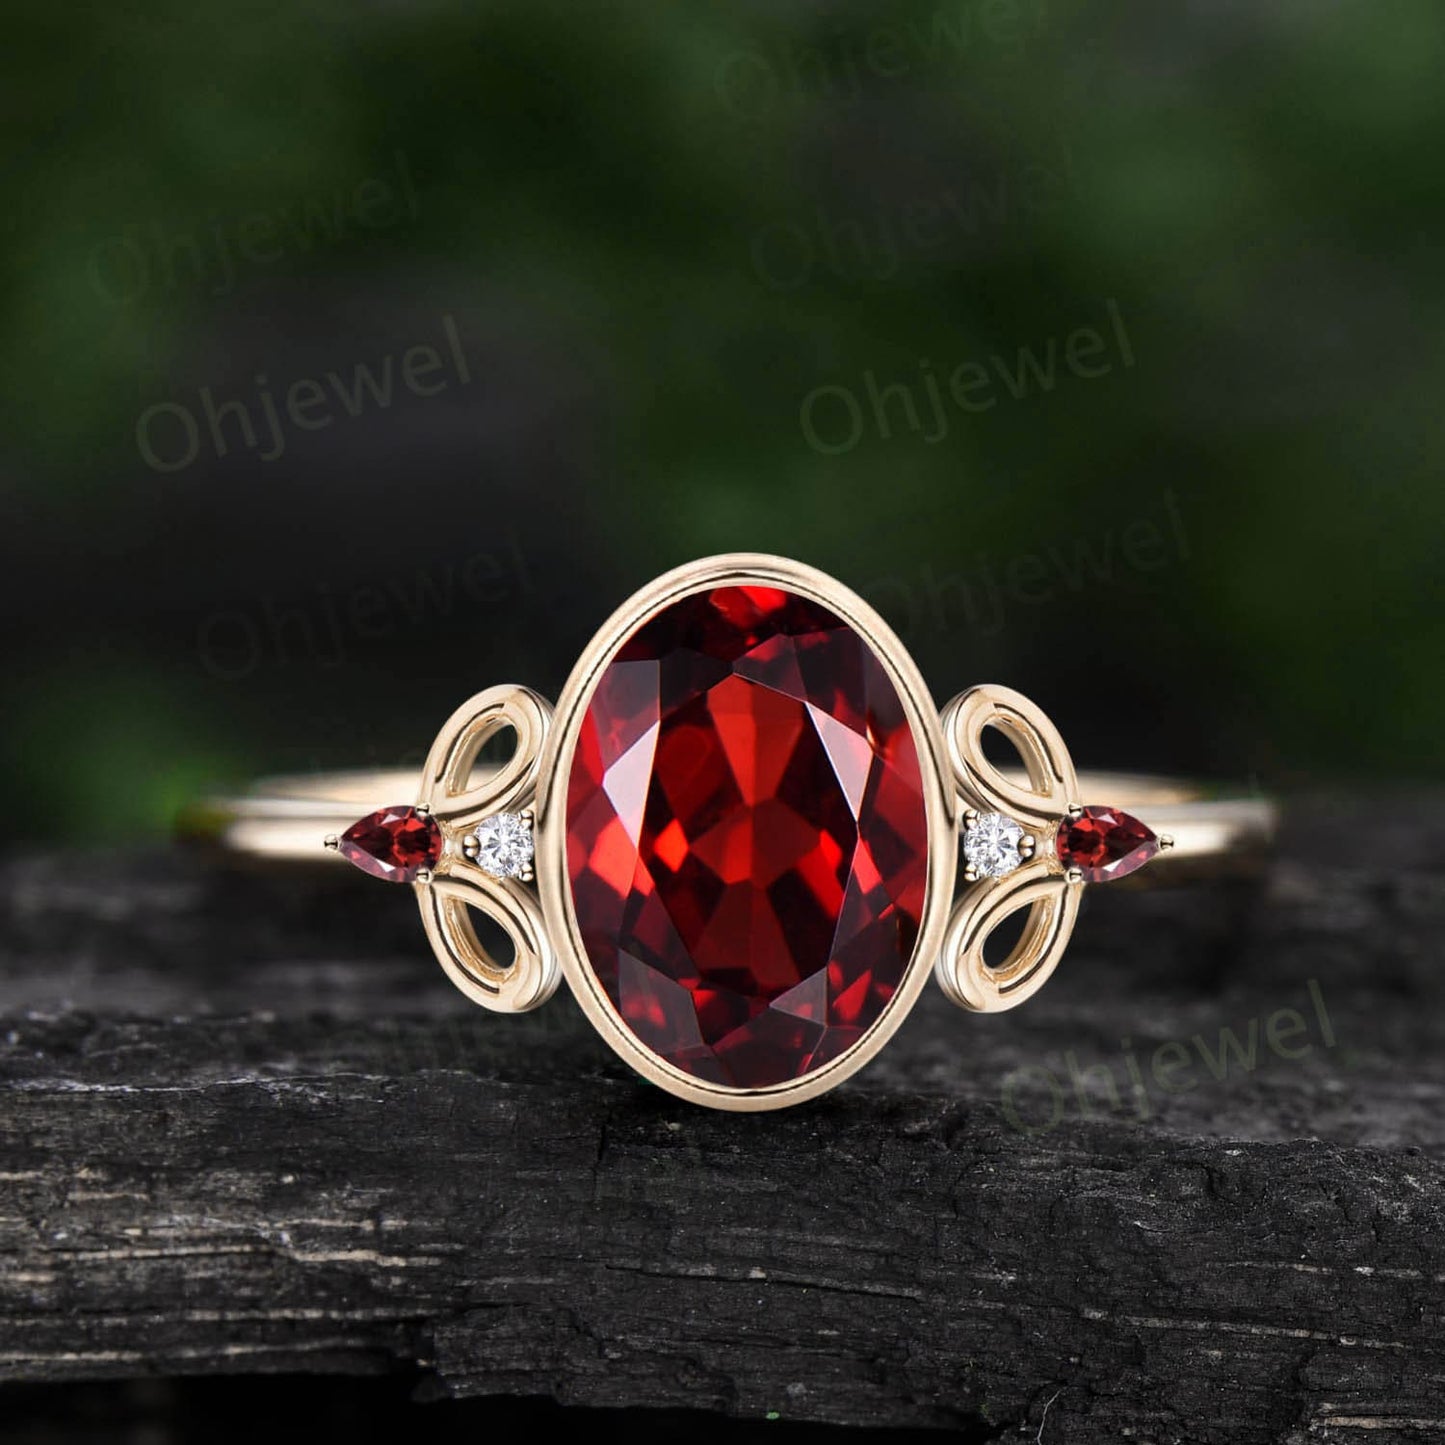 Oval red garnet ring vintage rose gold bezel unique engagement ring art deco five stone bridal wedding anniversary ring gift for women